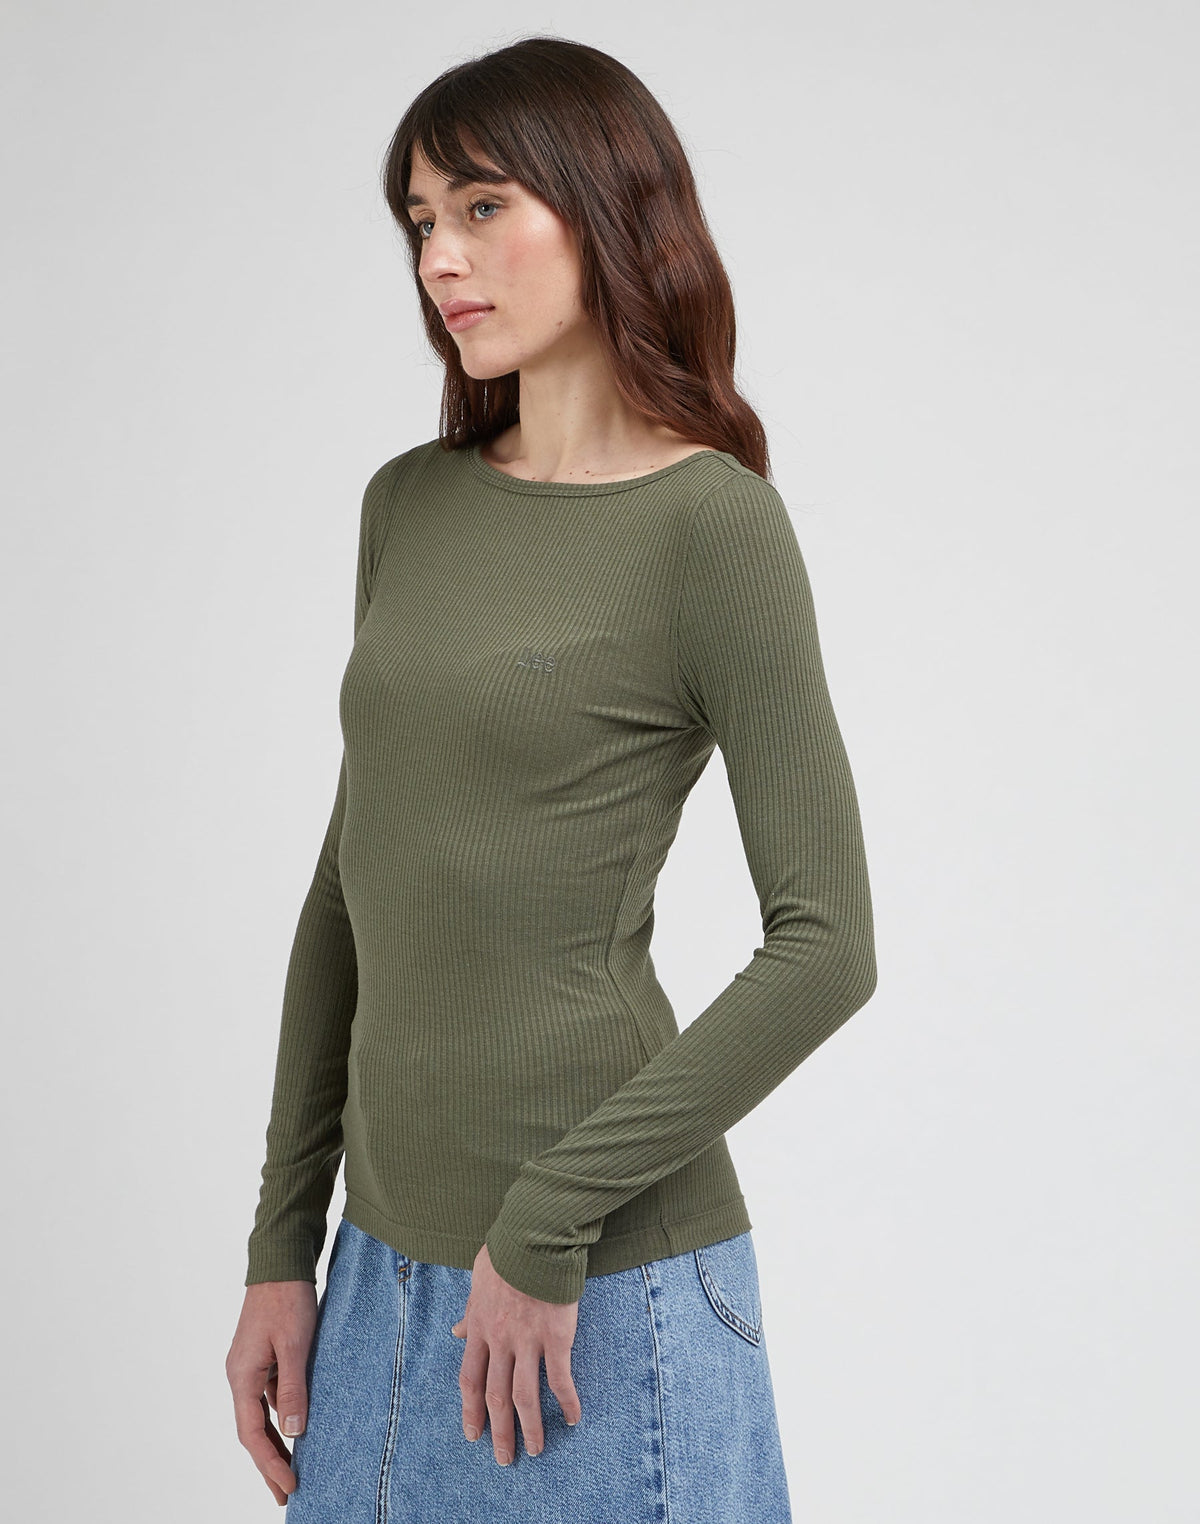 LS Boat Neck Tee in Olive Grove